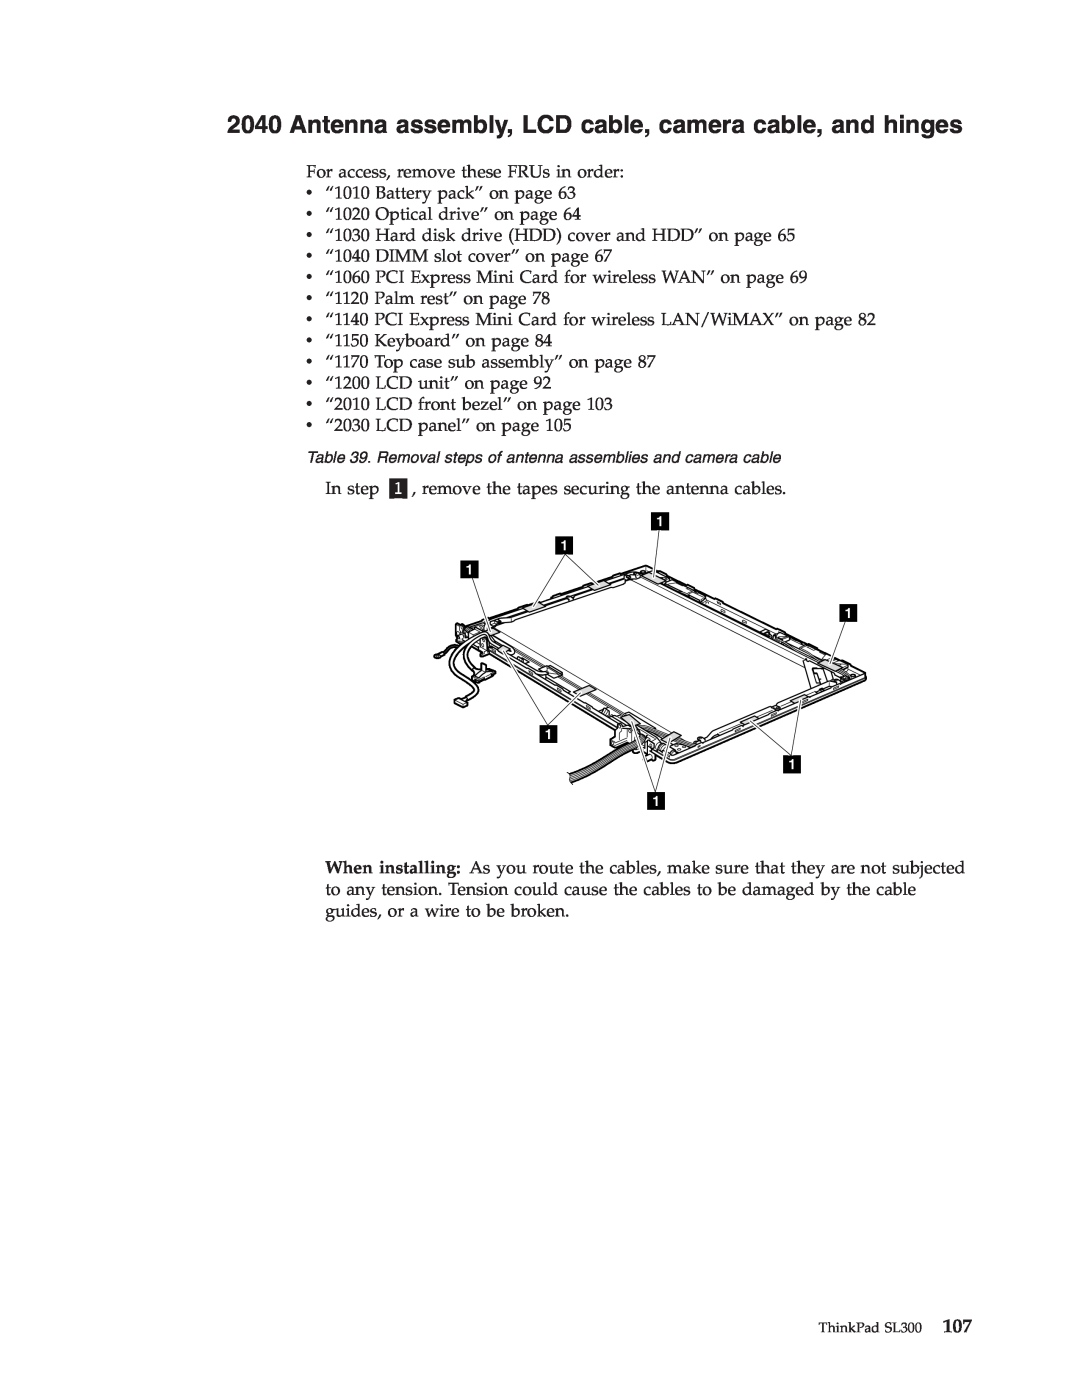 Lenovo SL300 Antenna assembly, LCD cable, camera cable, and hinges, Removal steps of antenna assemblies and camera cable 